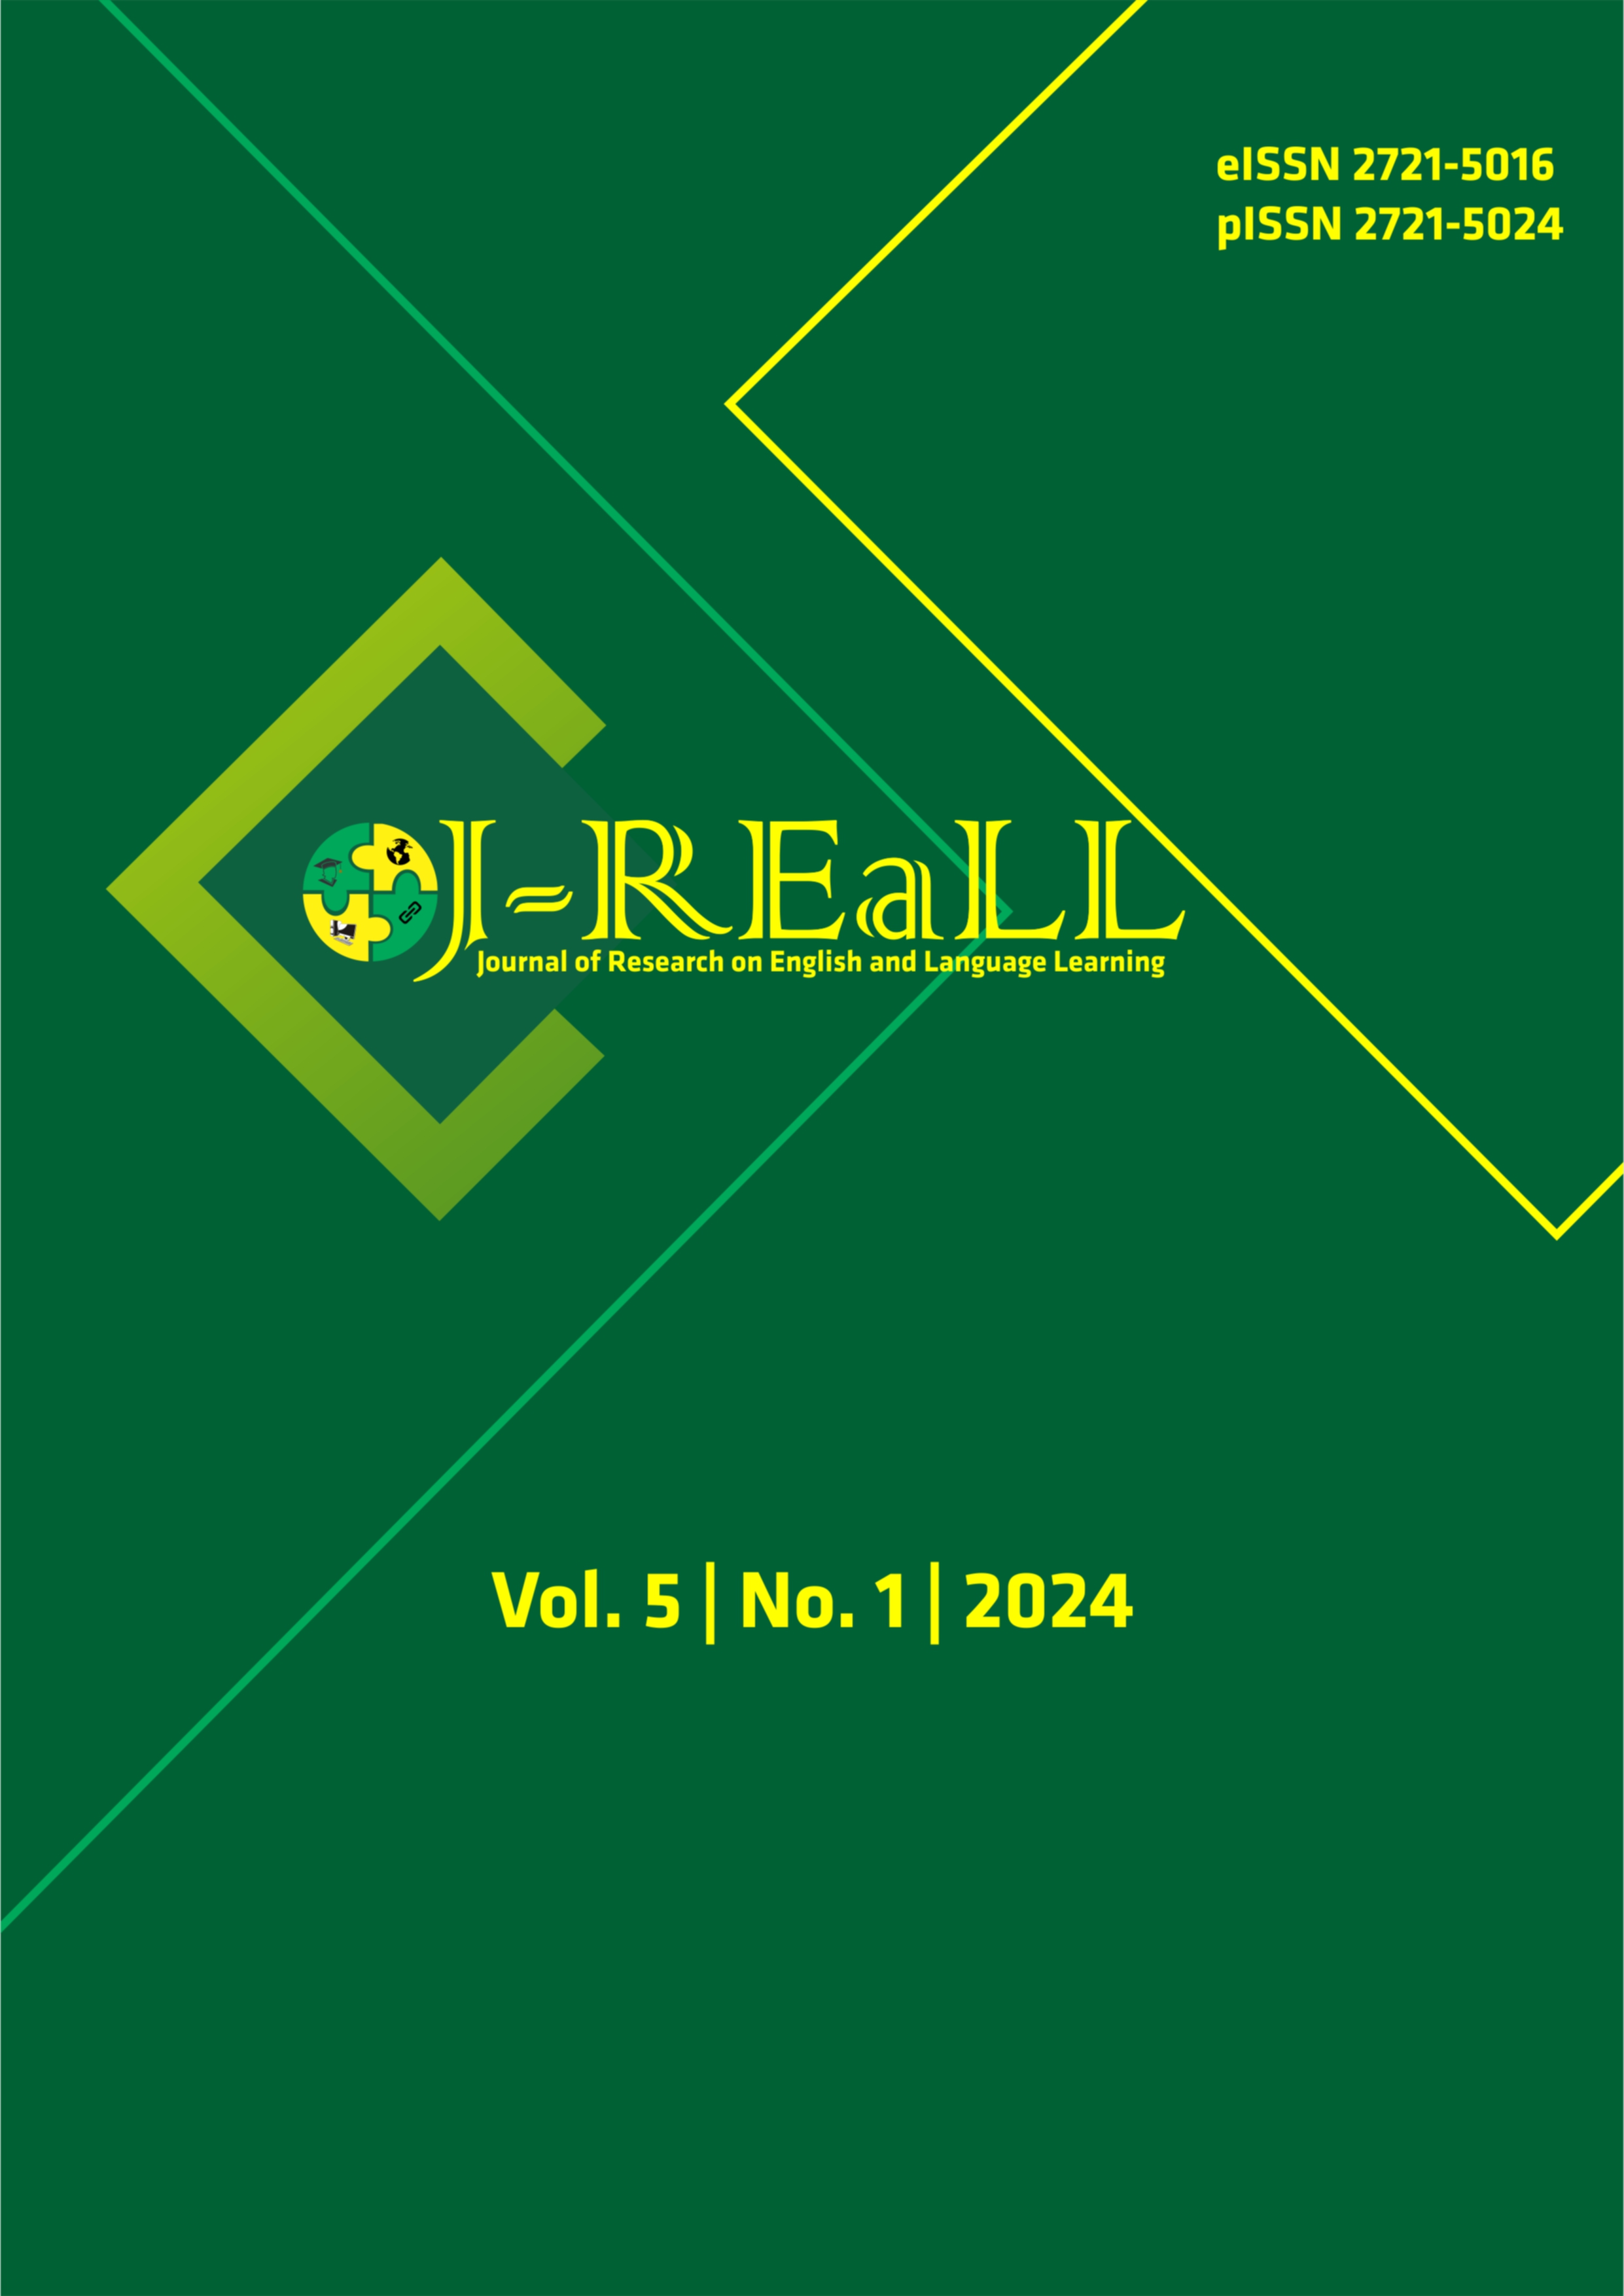 					View Vol. 5 No. 1 (2024): Journal of Research on English and Language Learning (J-REaLL) IN-PRESS
				